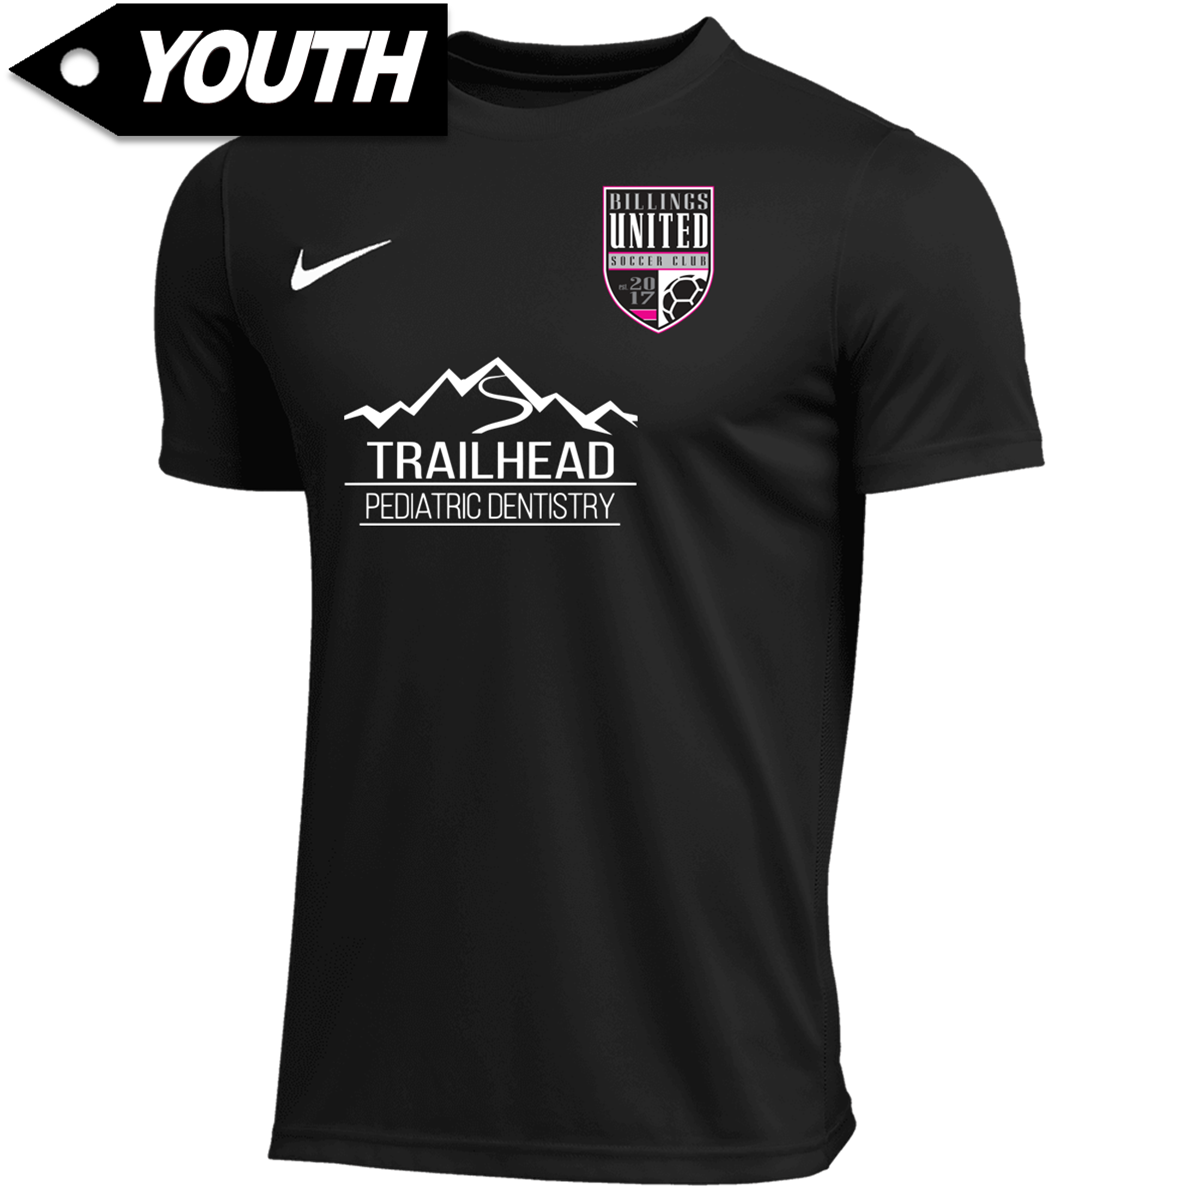 Billings United Thorns Black Jersey [Youth]